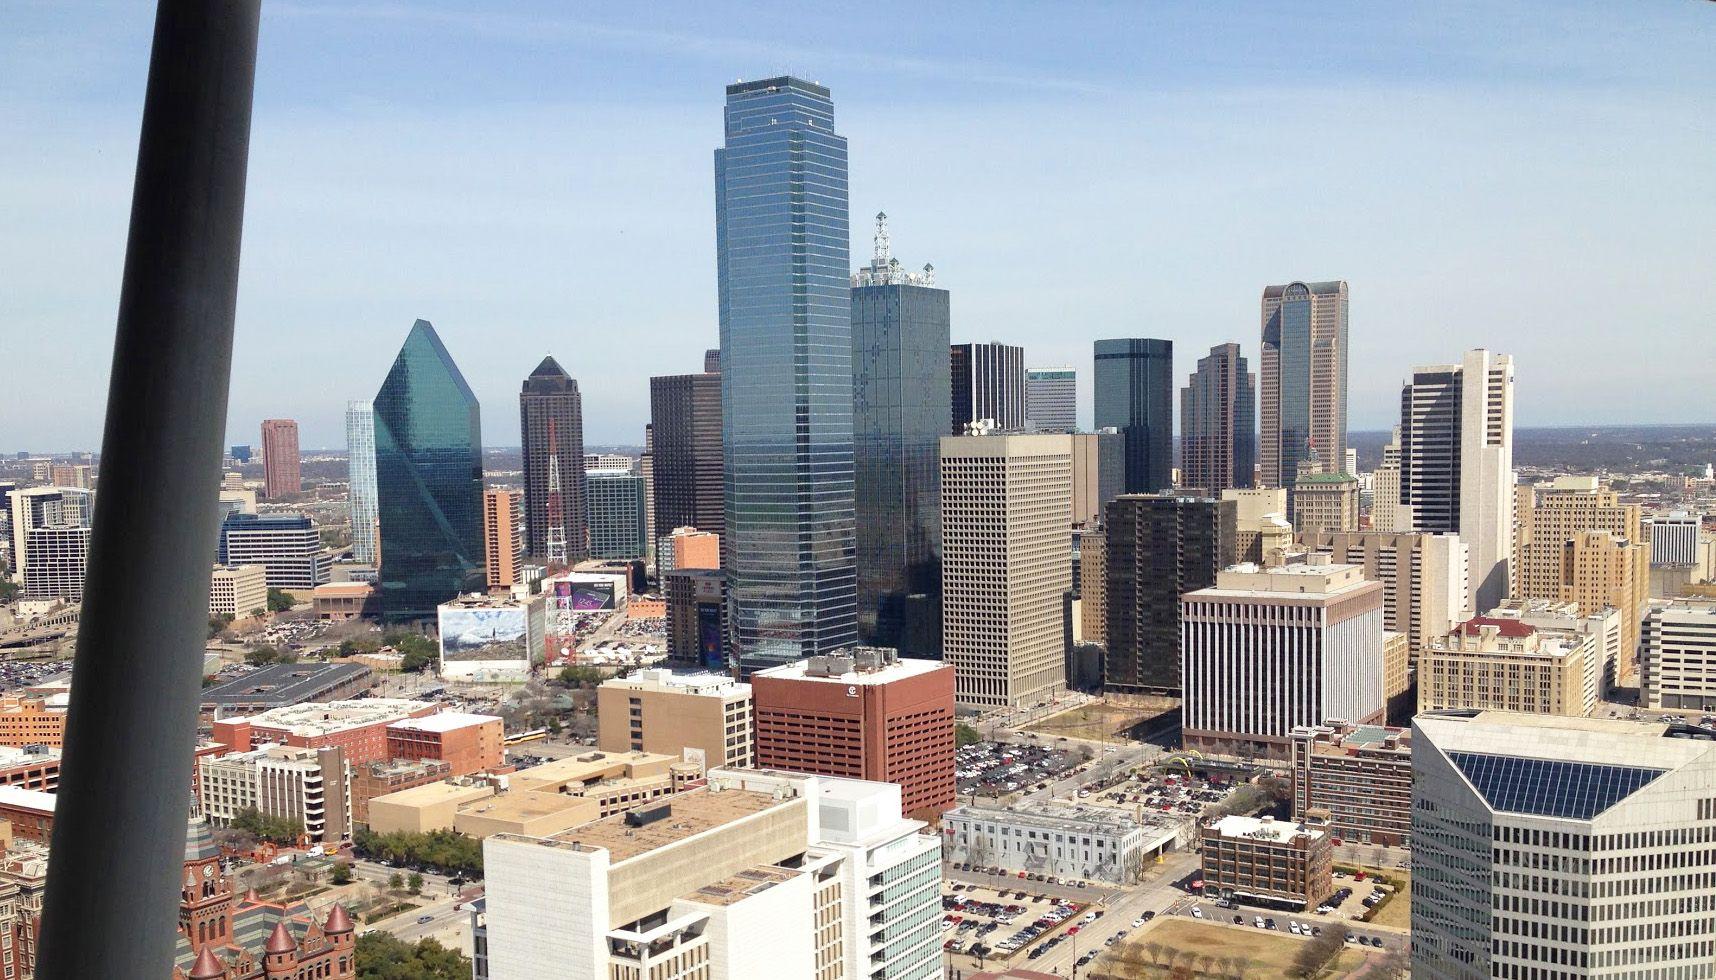 A view of the Dallas skyline from the top of Reunion Tower.